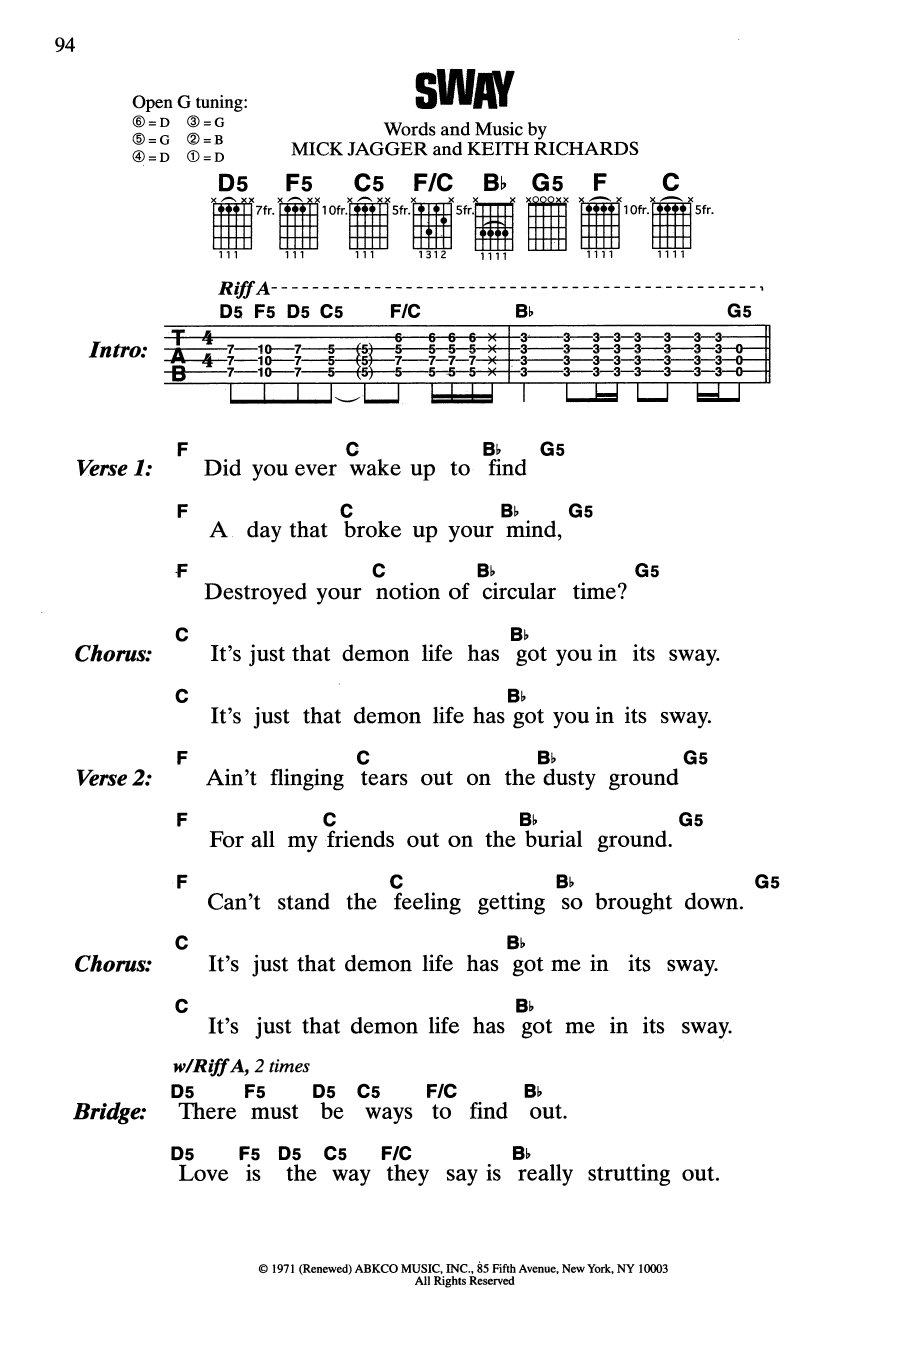 Download The Rolling Stones Sway Sheet Music